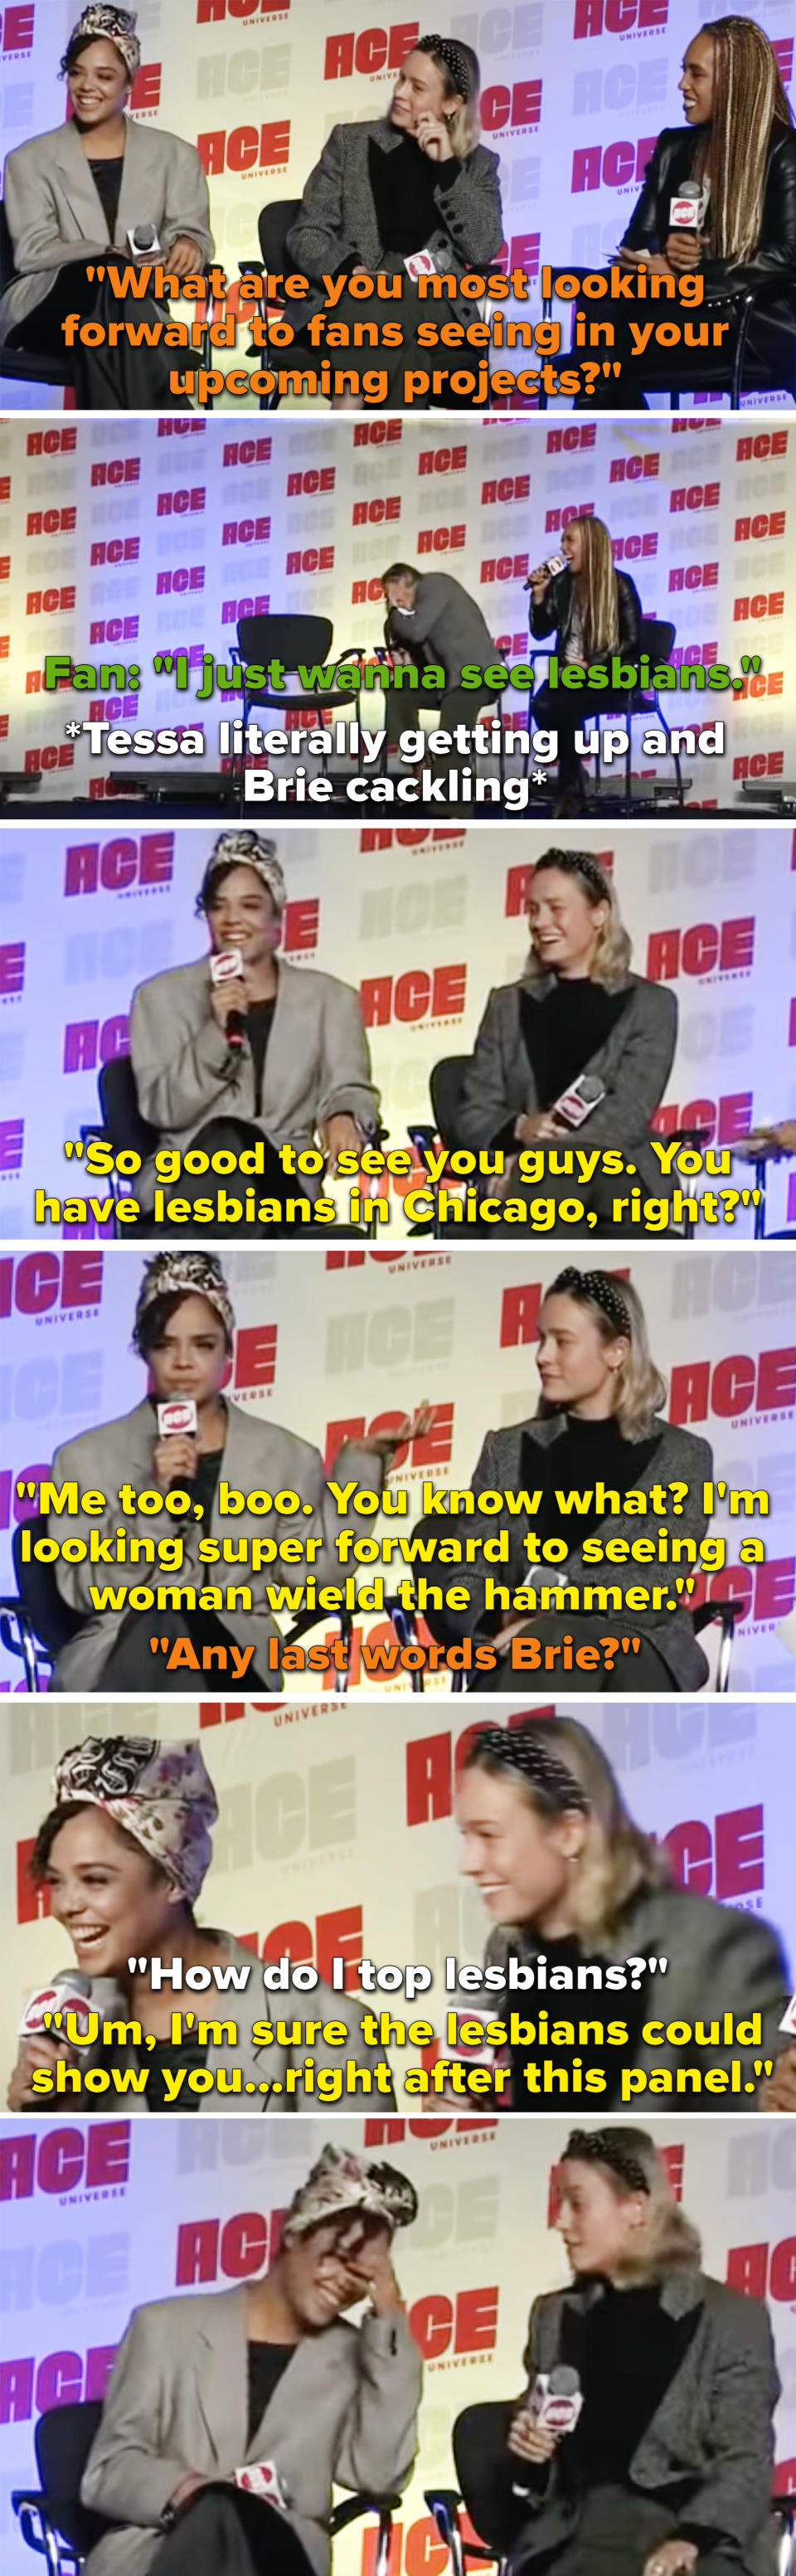 Brie saying "How do I top lesbians?" and Tessa replying, "I'm sure the lesbians could show you right after this panel"